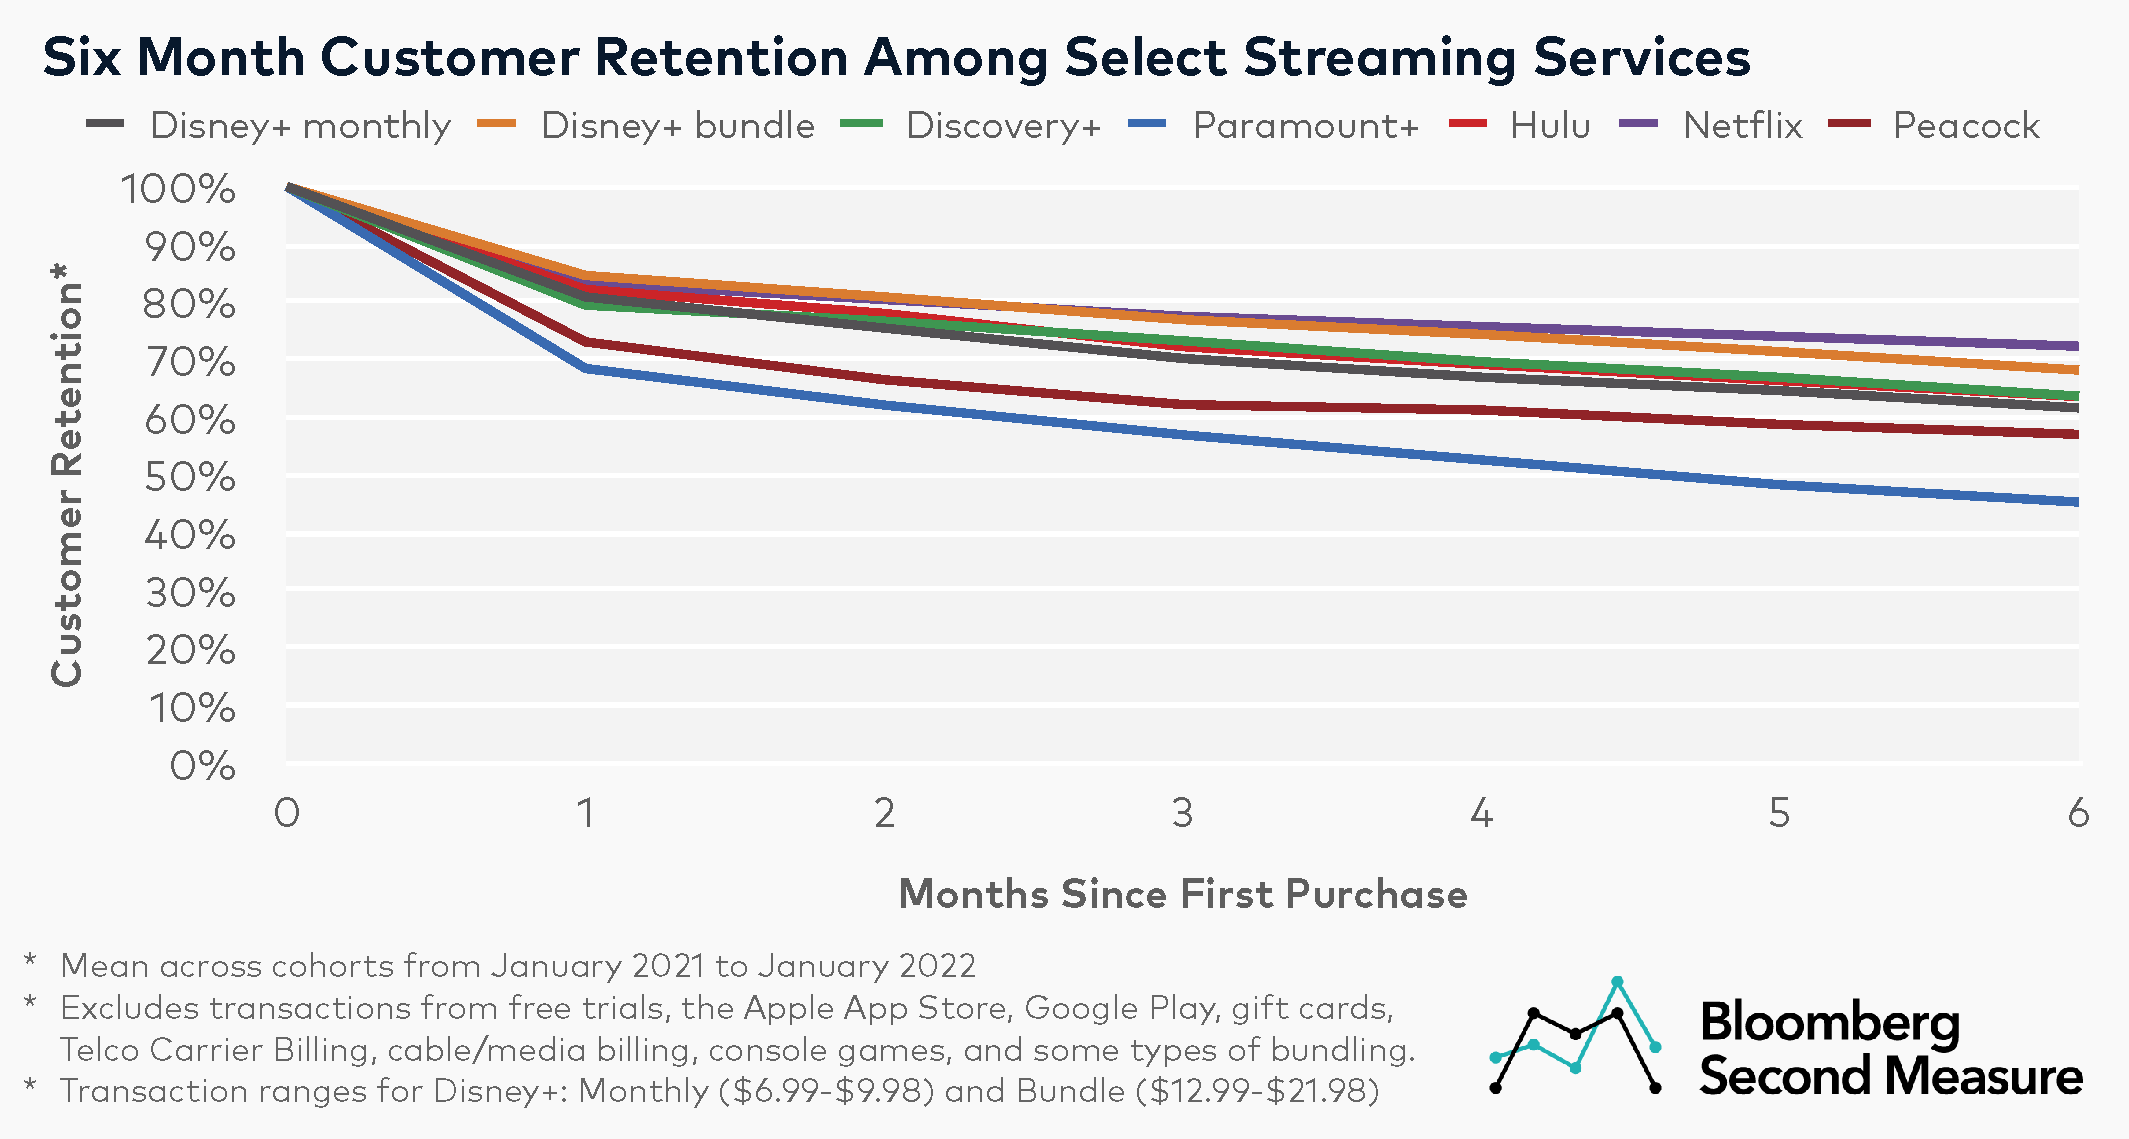 Streaming services see slightly higher customer retention with ad-free plans